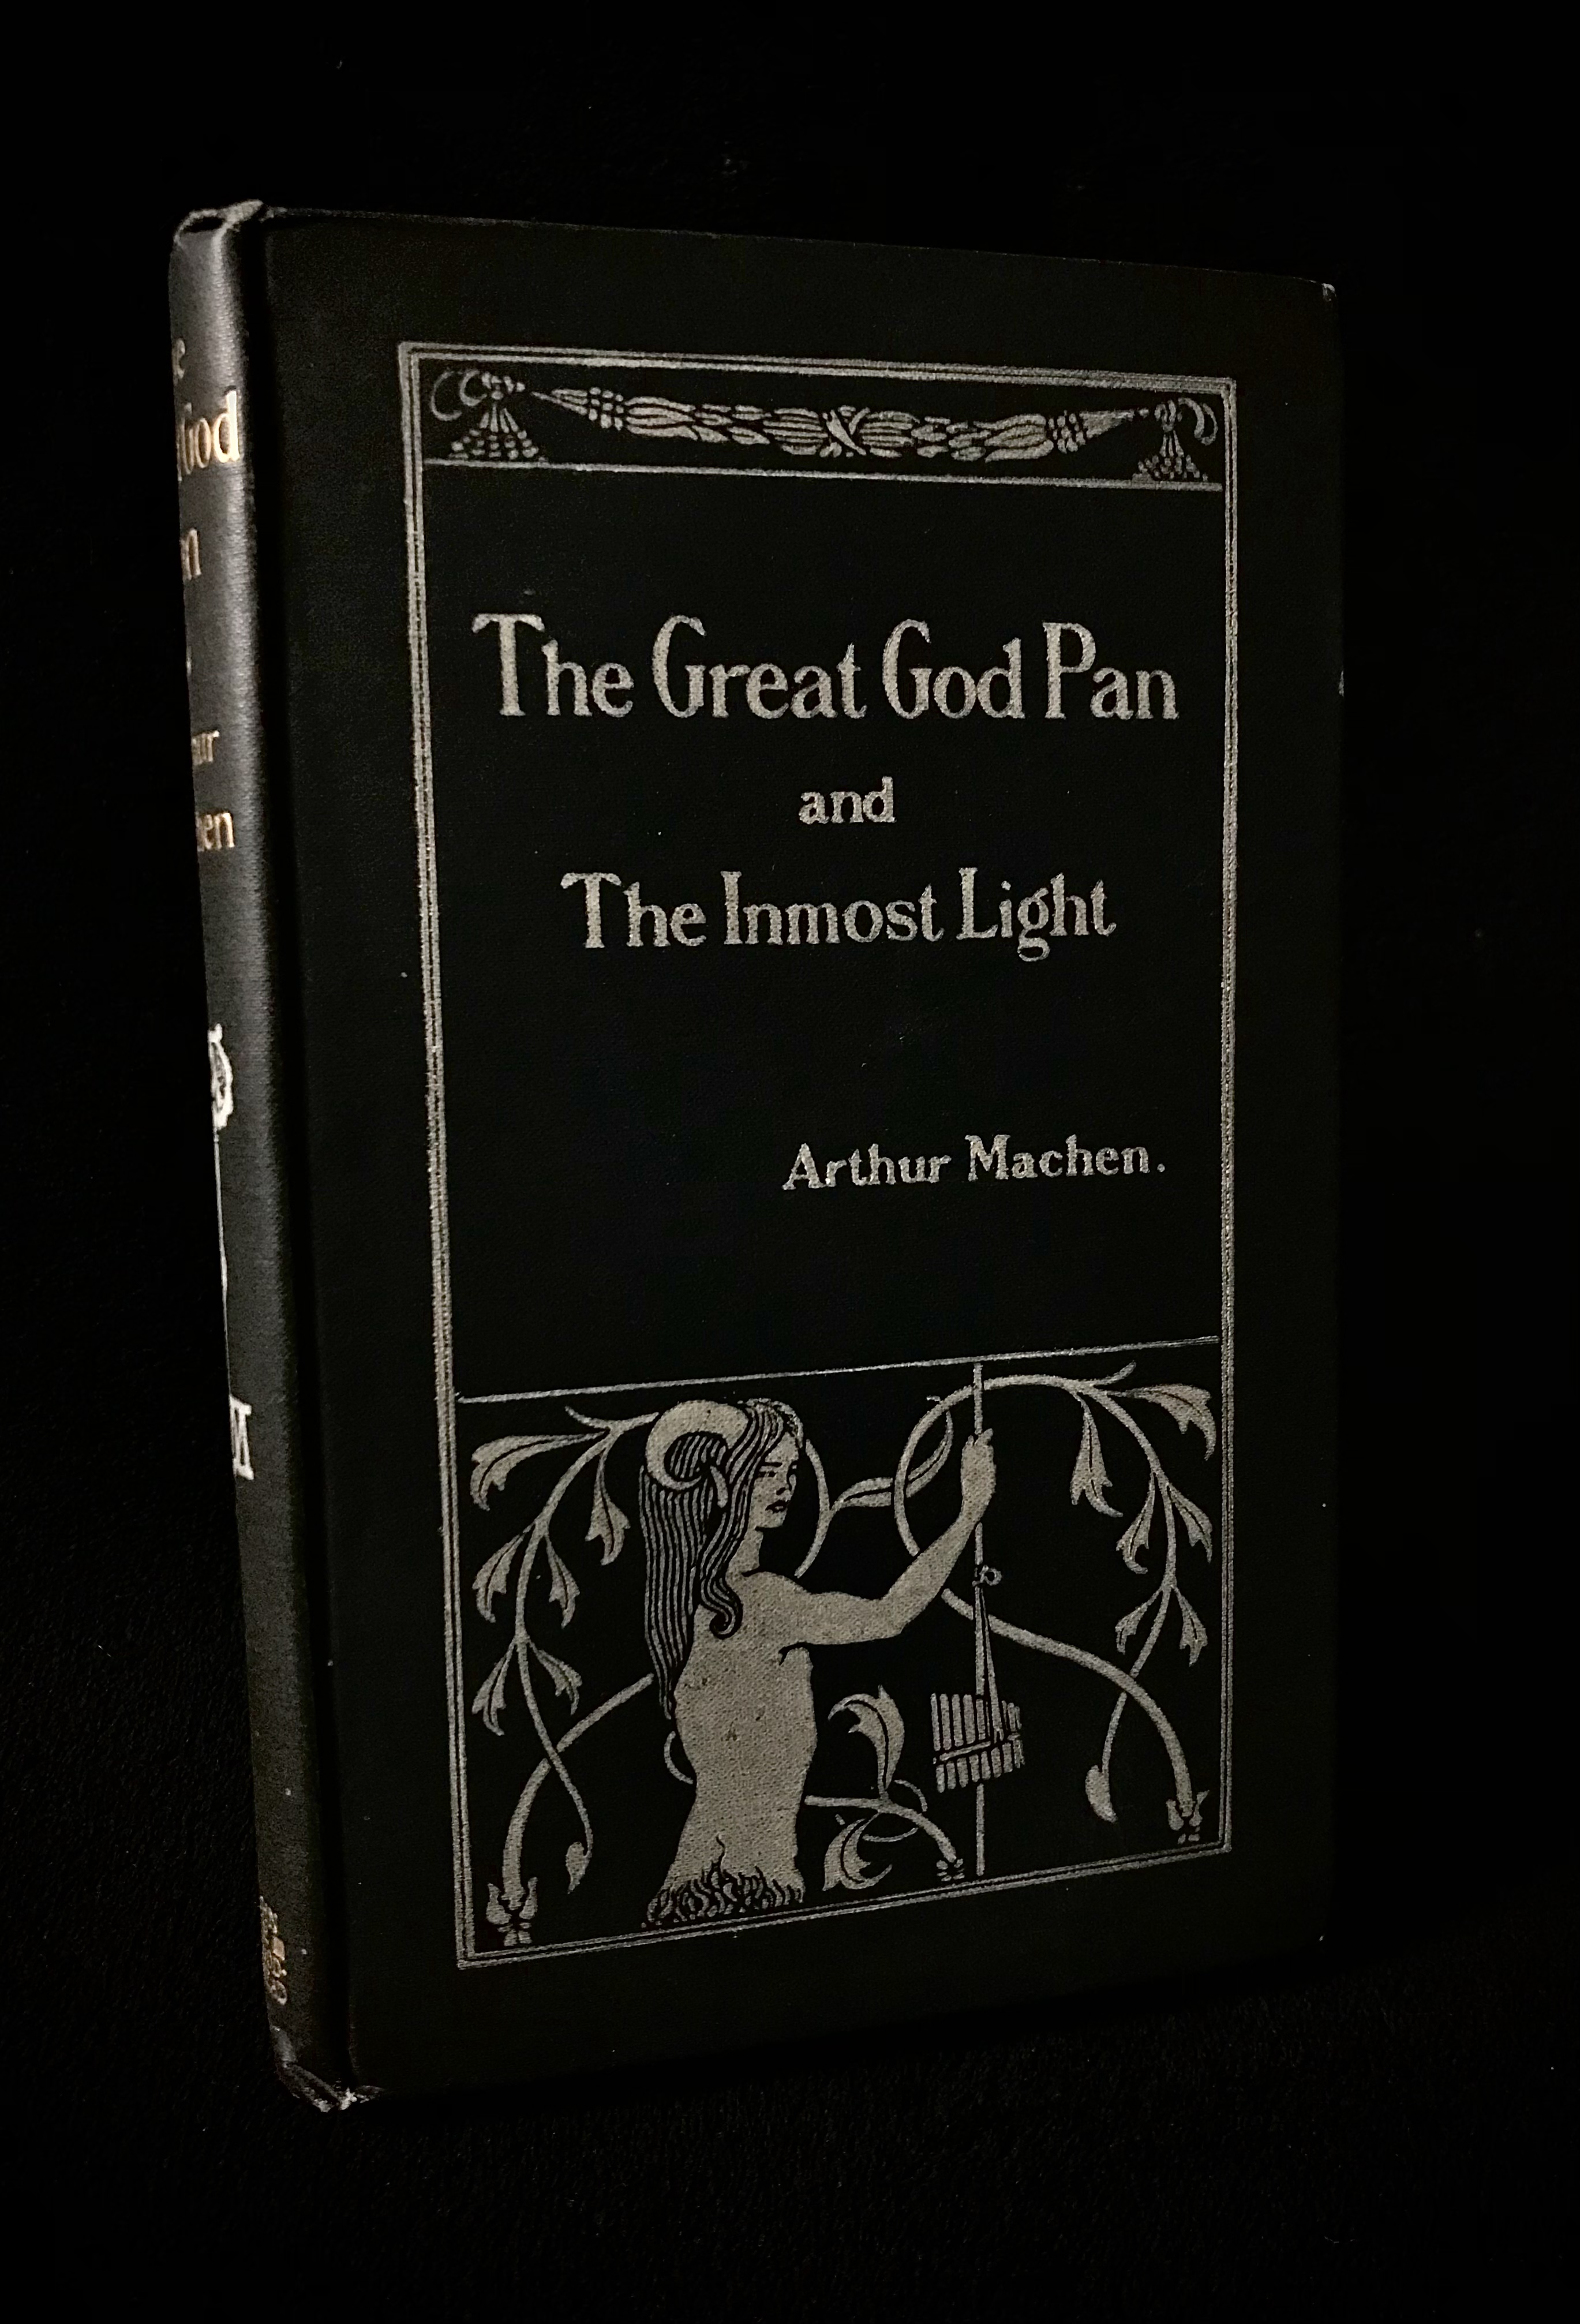 The Great God Pan and The Inmost Light by Arthur Machen